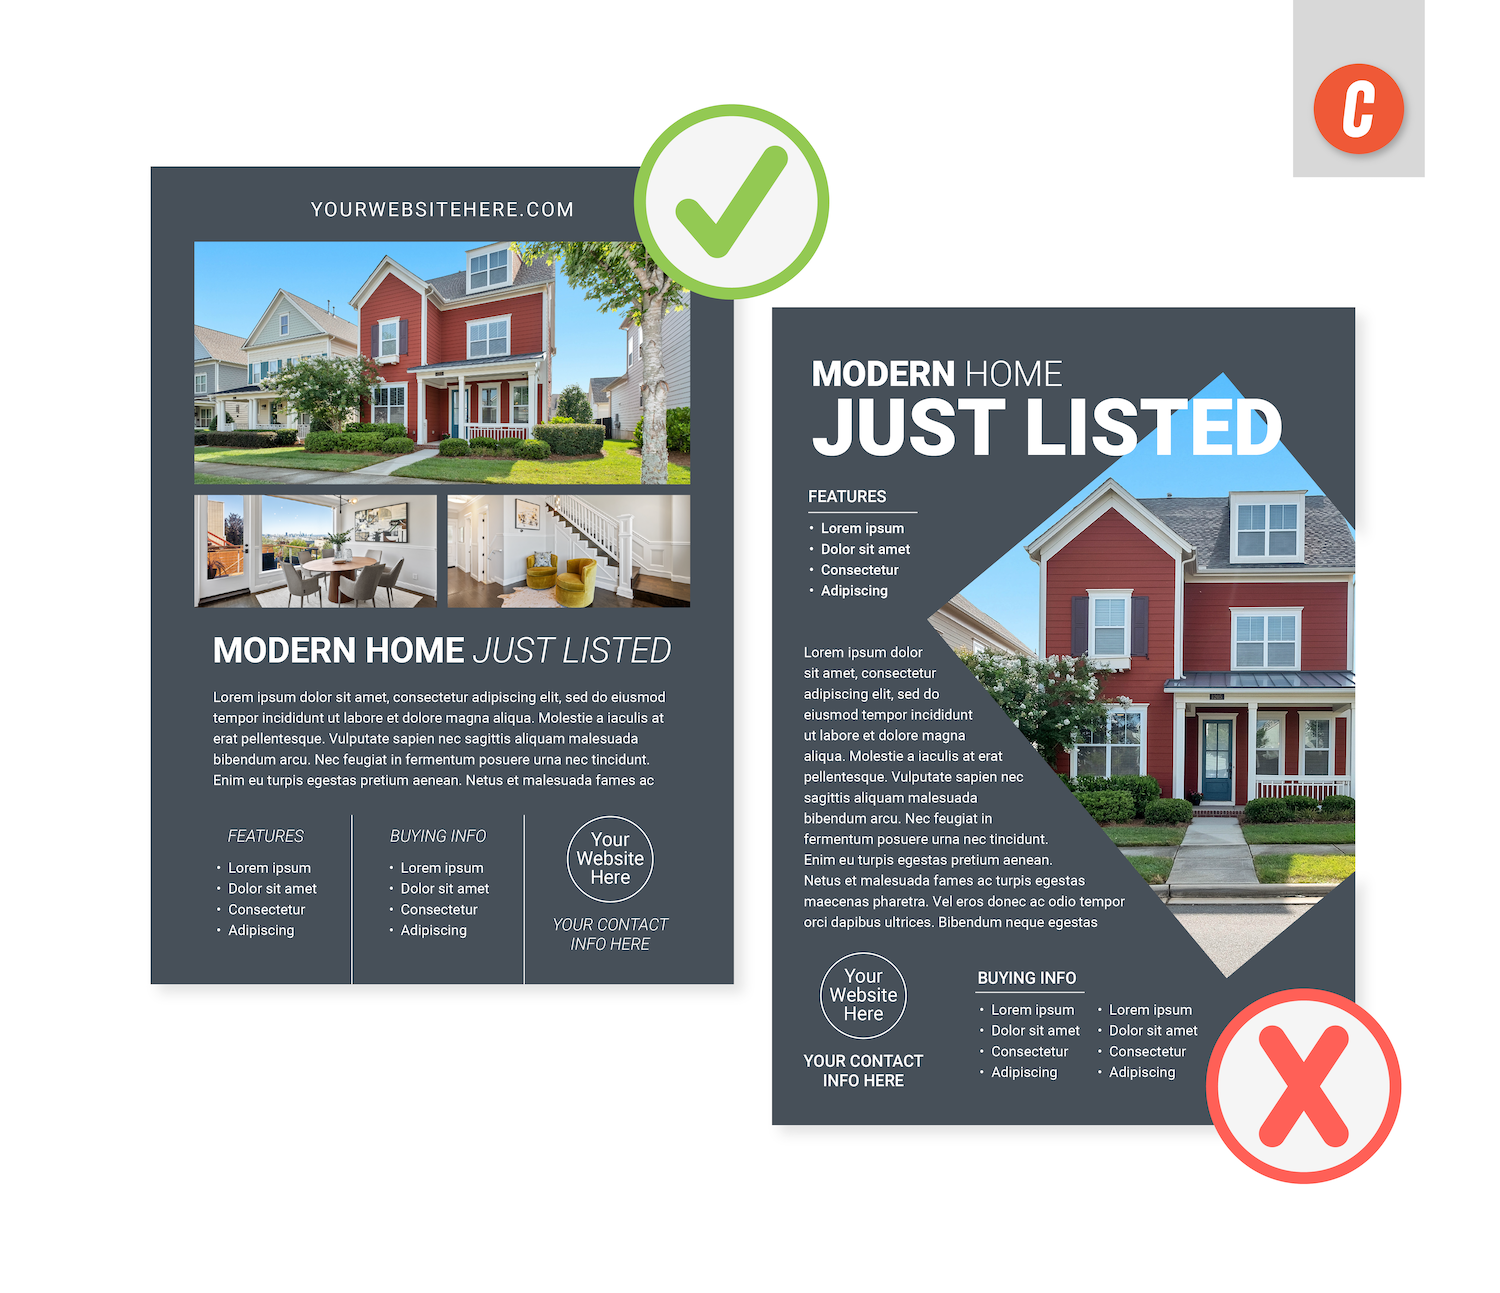 Two real estate flier examples, one with consistent branding and the other with a confusing combination of styles